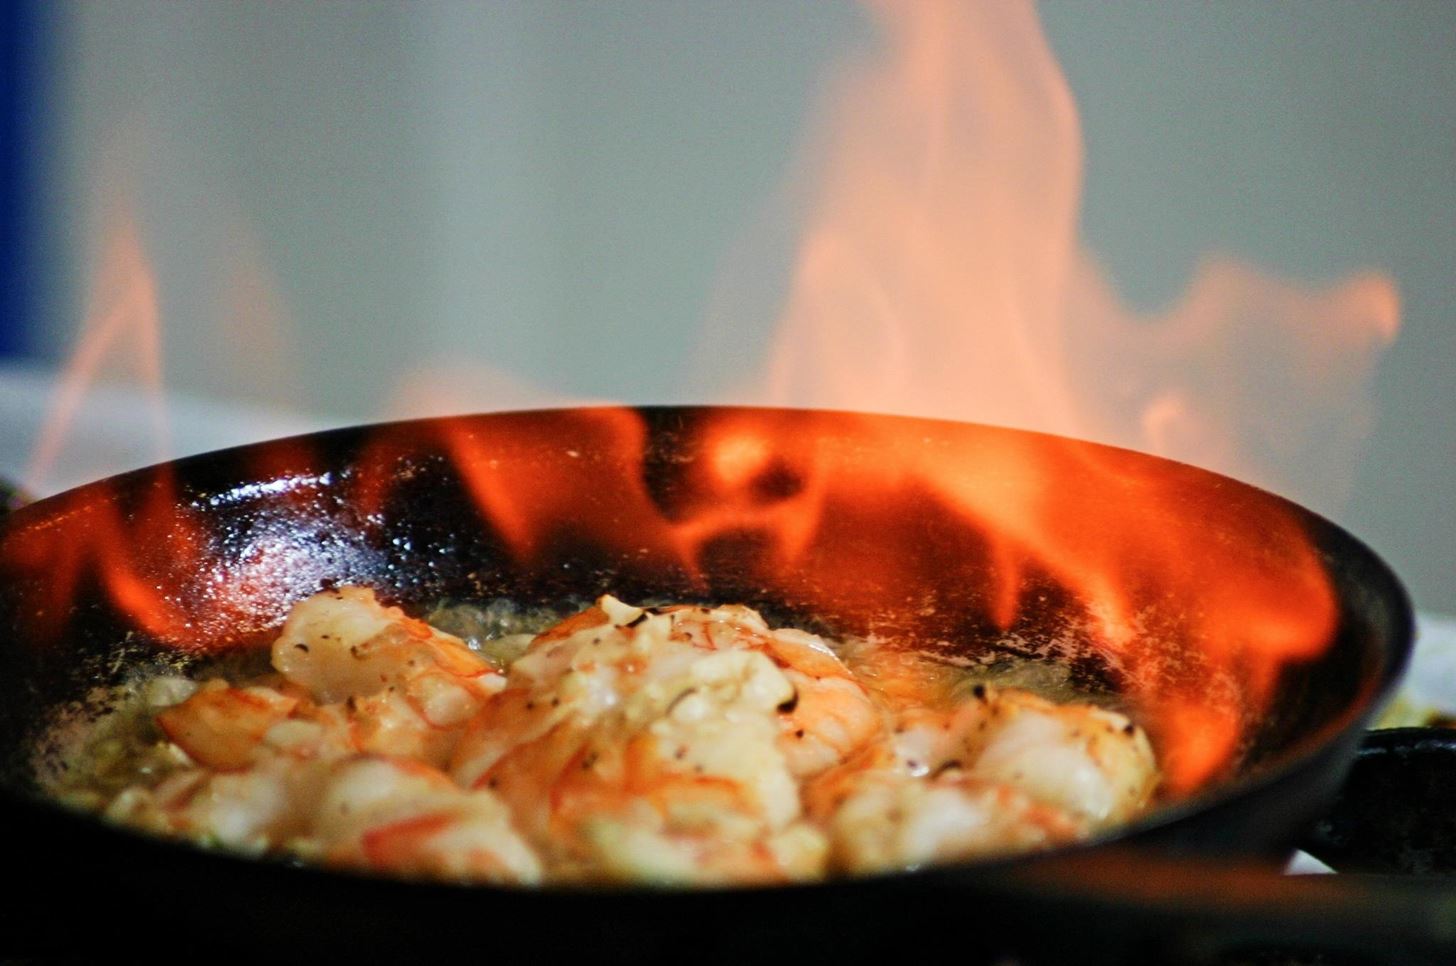 How to Properly Flambé Without Burning Your Food